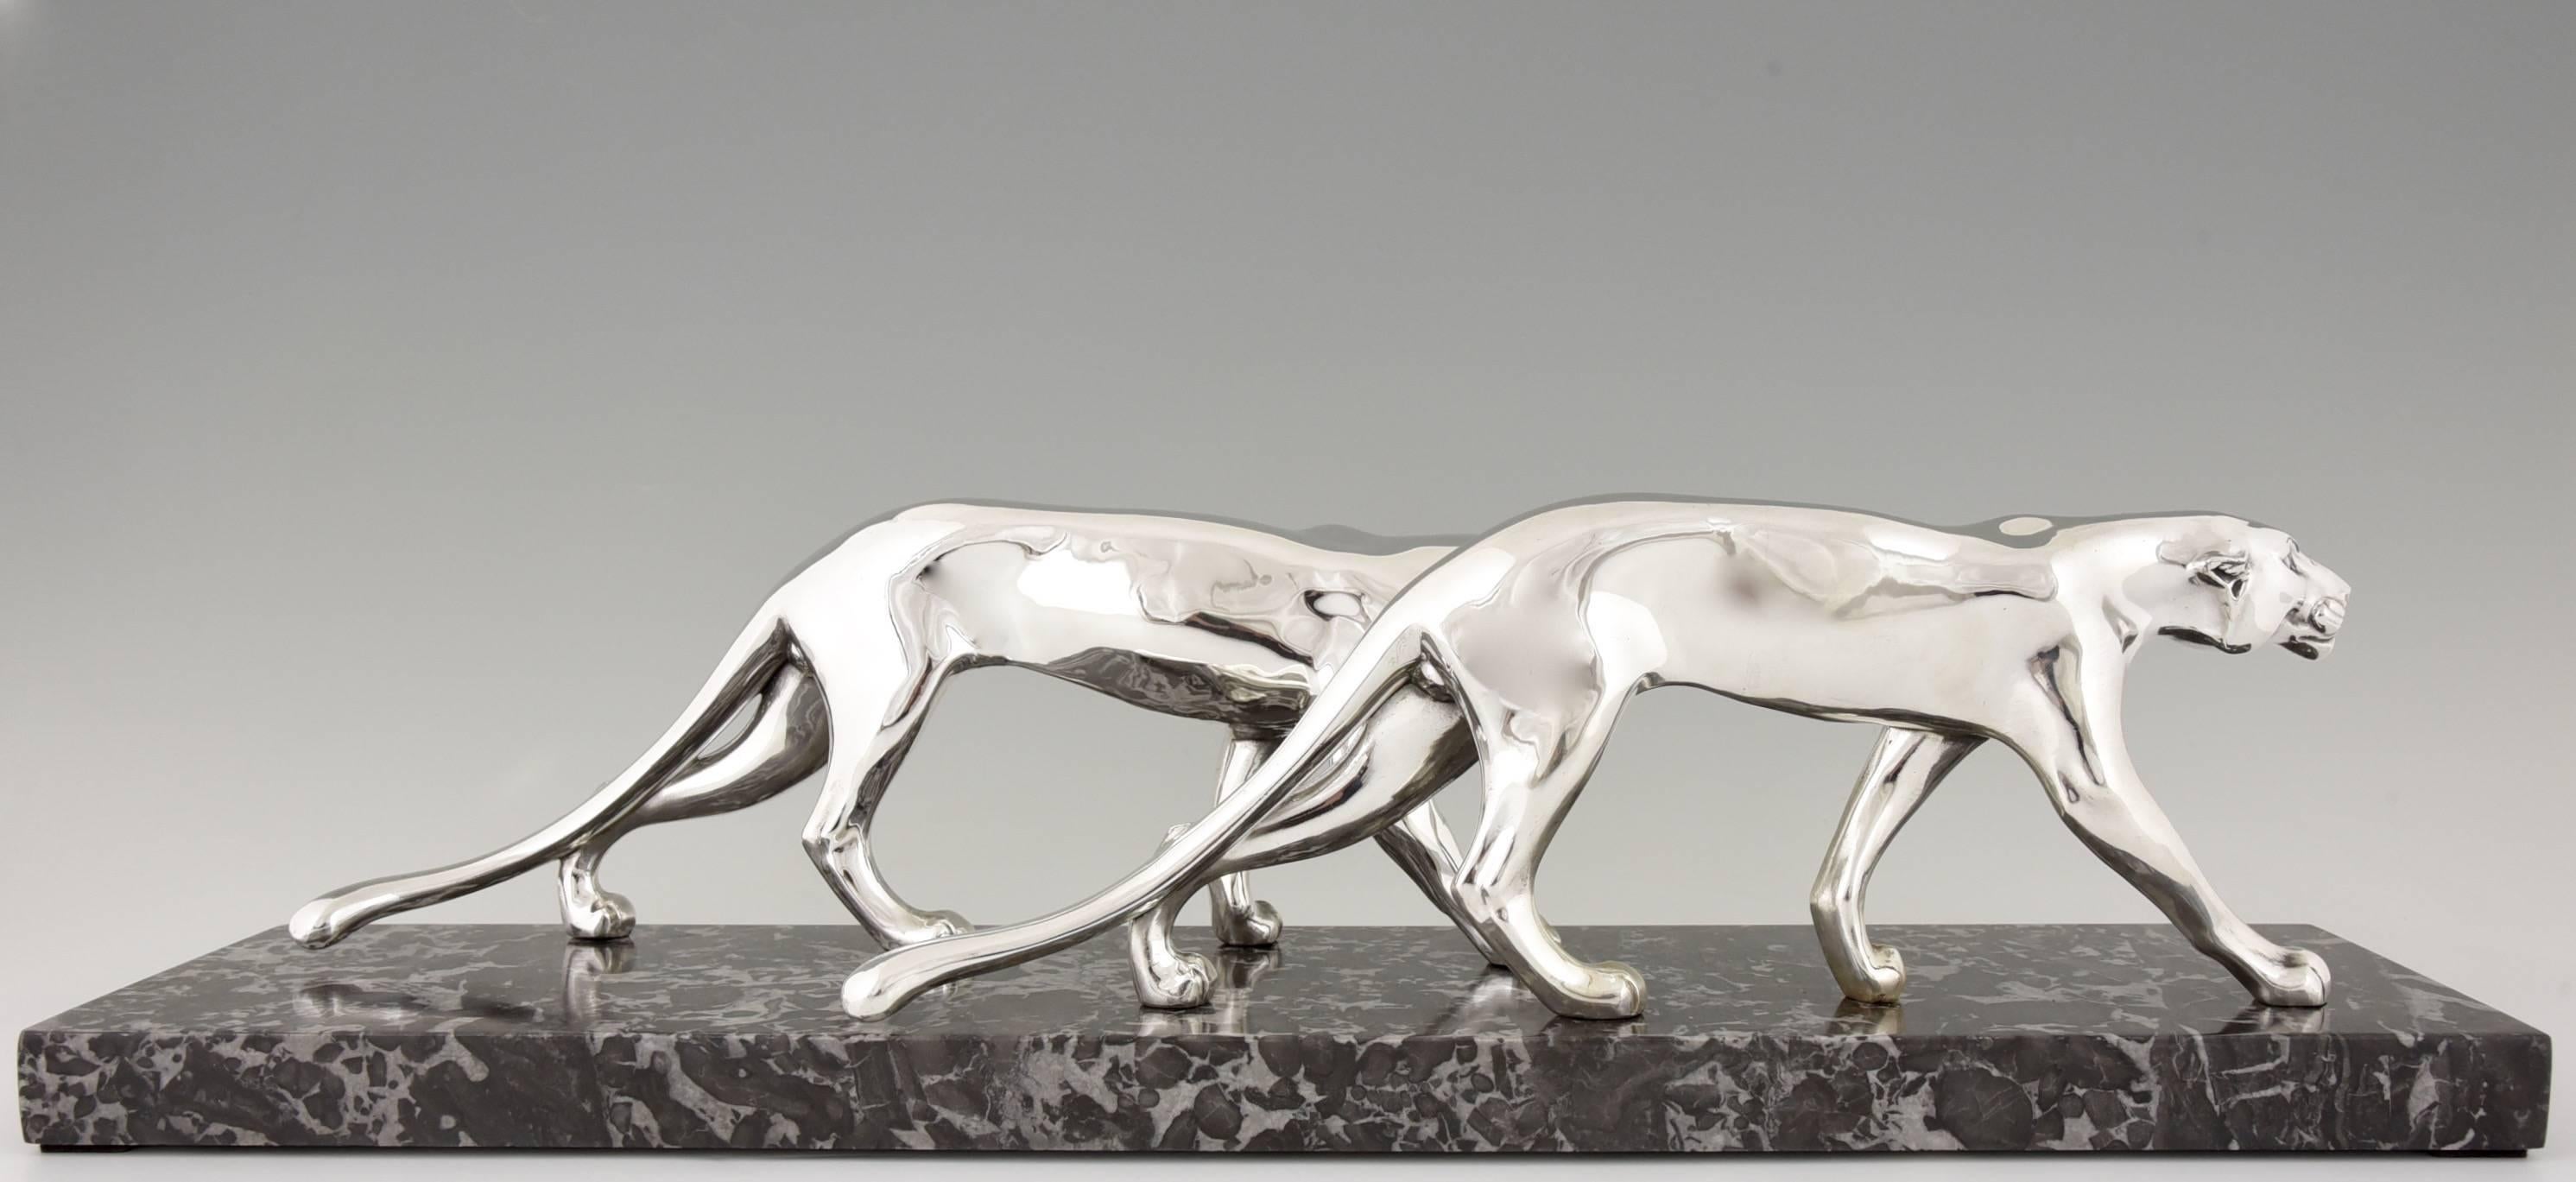 Silvered French Art Deco panther sculpture by M. Font, 1930